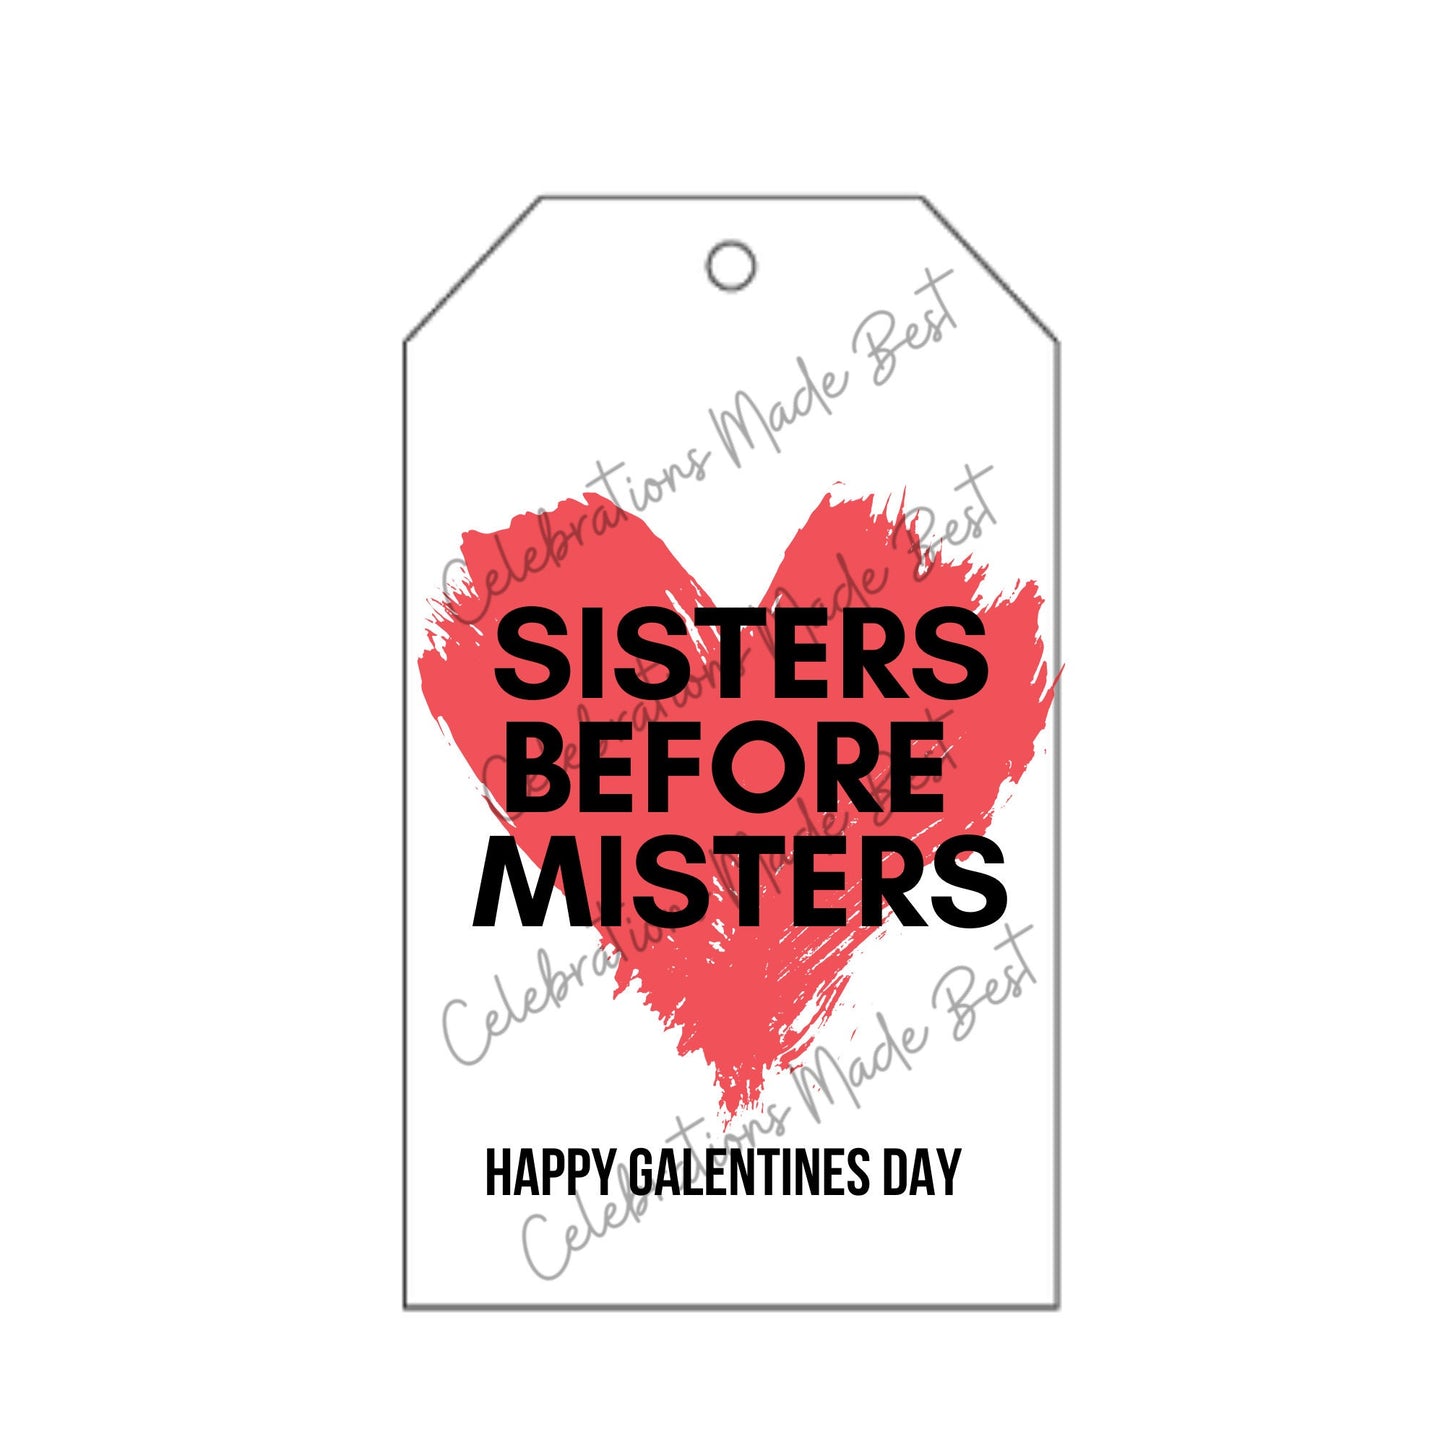 Galentines Day Gift Tags | Valentines Day Editable  Design | Sisters Before Misters